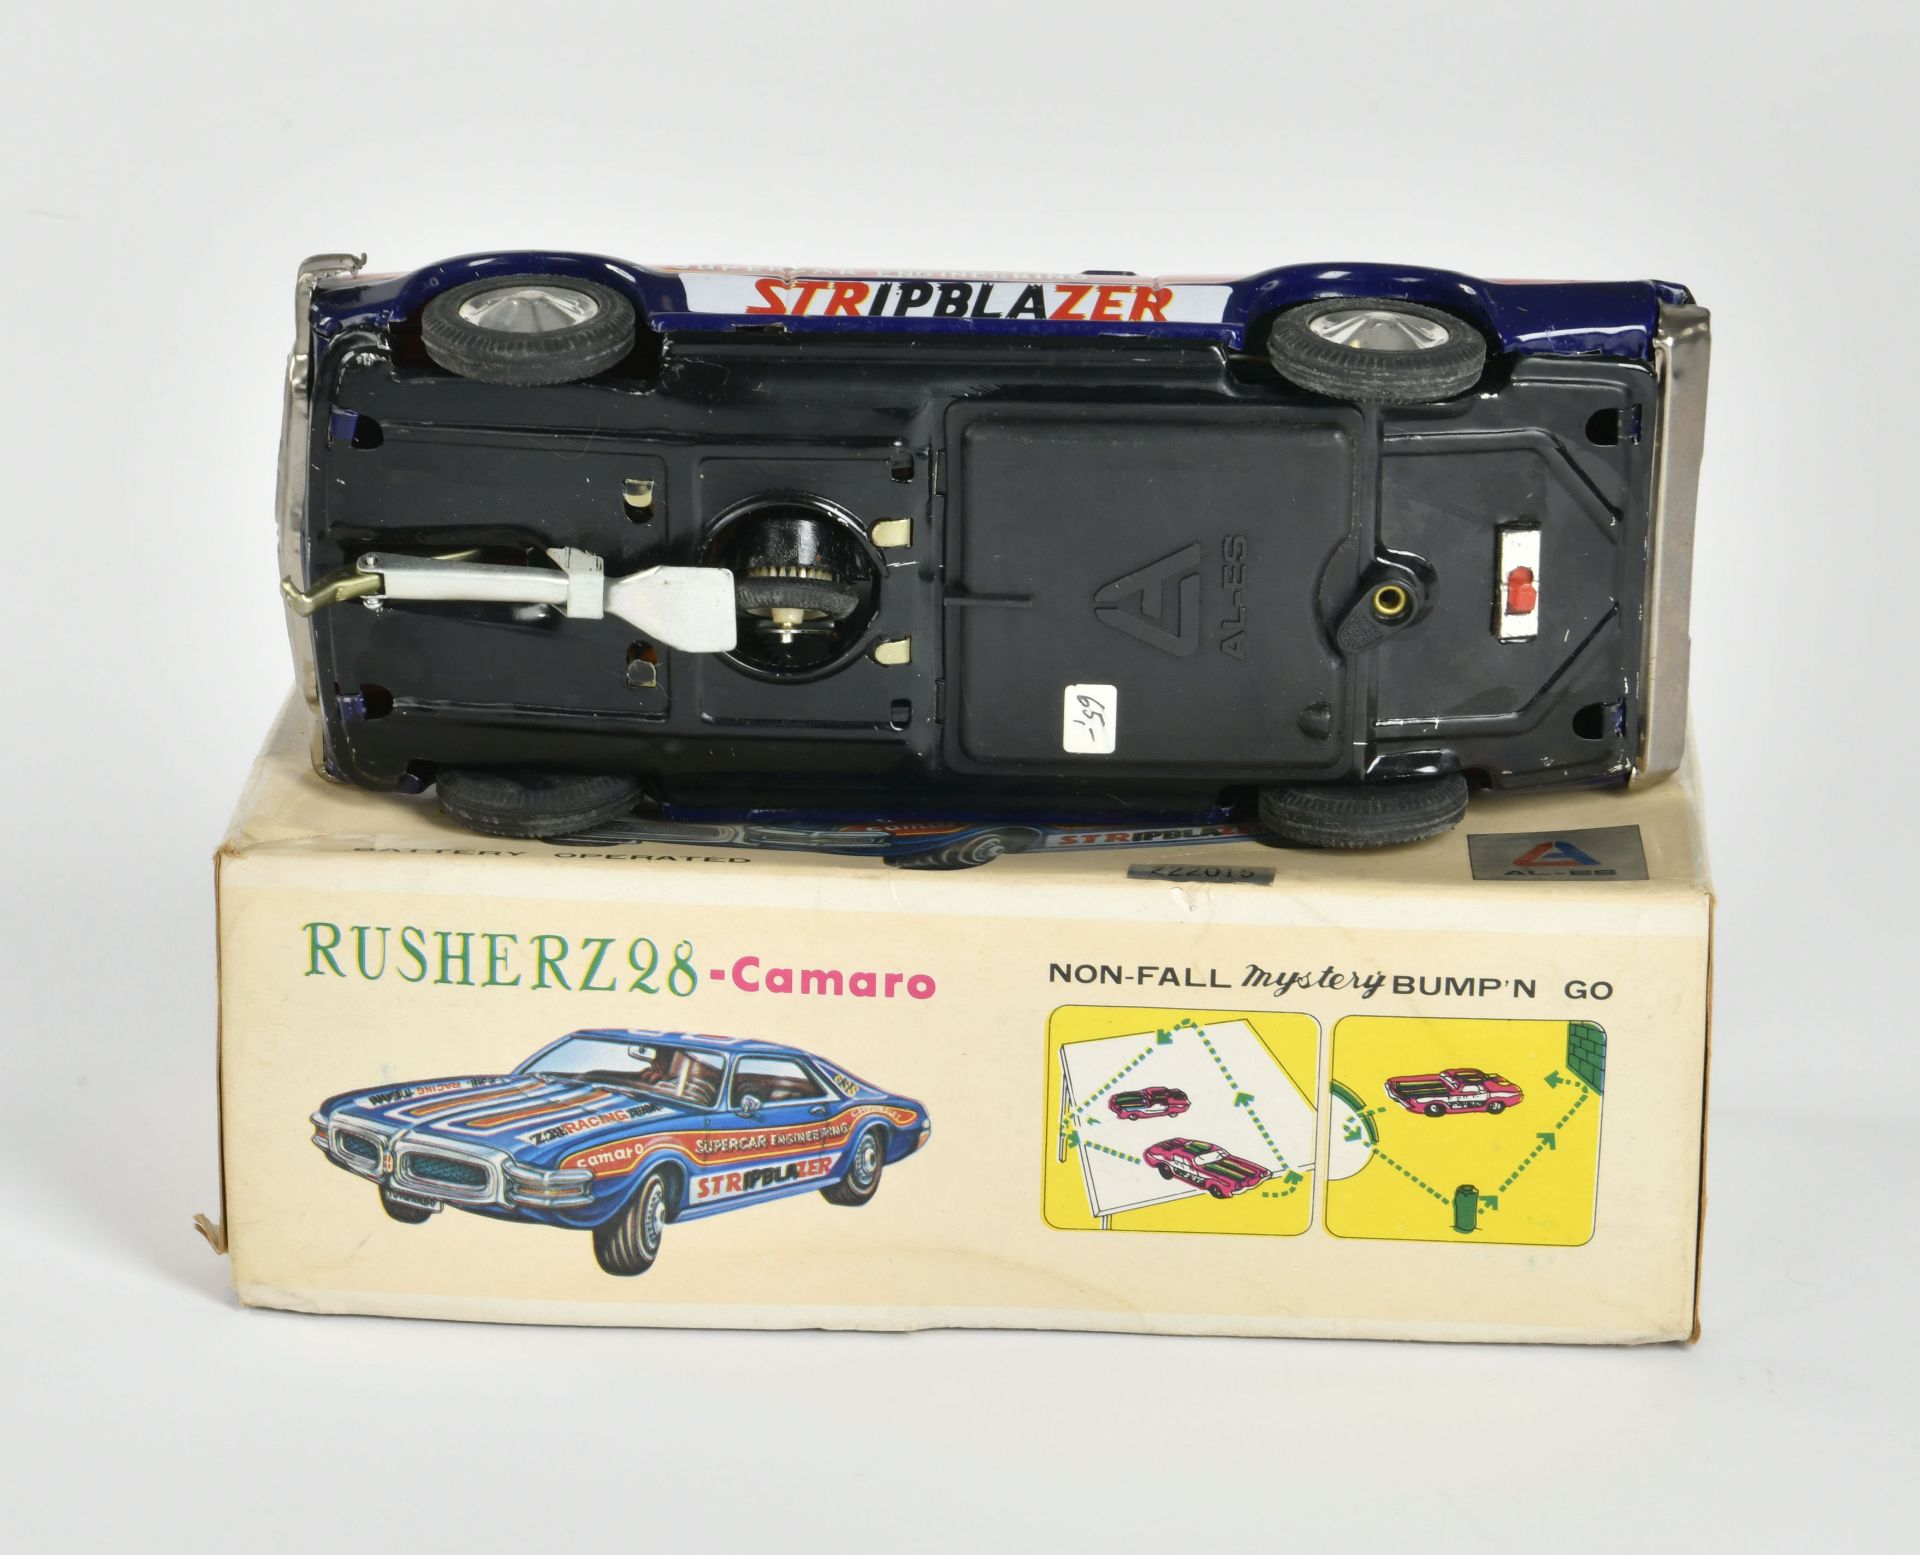 Rusher Z 28 Camaro, Japan, tin, 25cm, function not checked, paint d., box, C 3 - Image 3 of 3